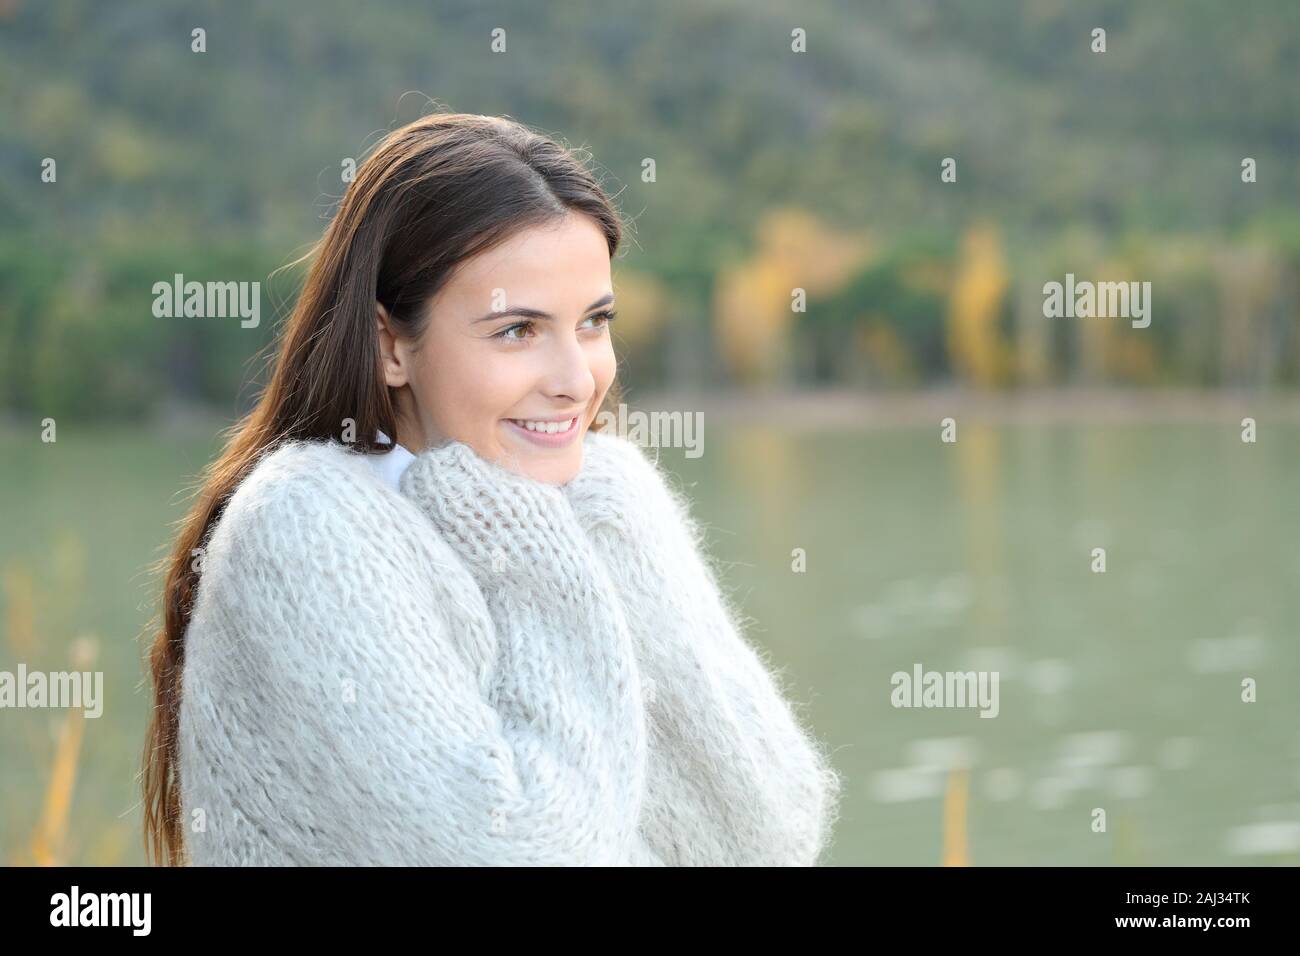 Candid girl warmly clothed with a sweater standing besida a lake looking away Stock Photo